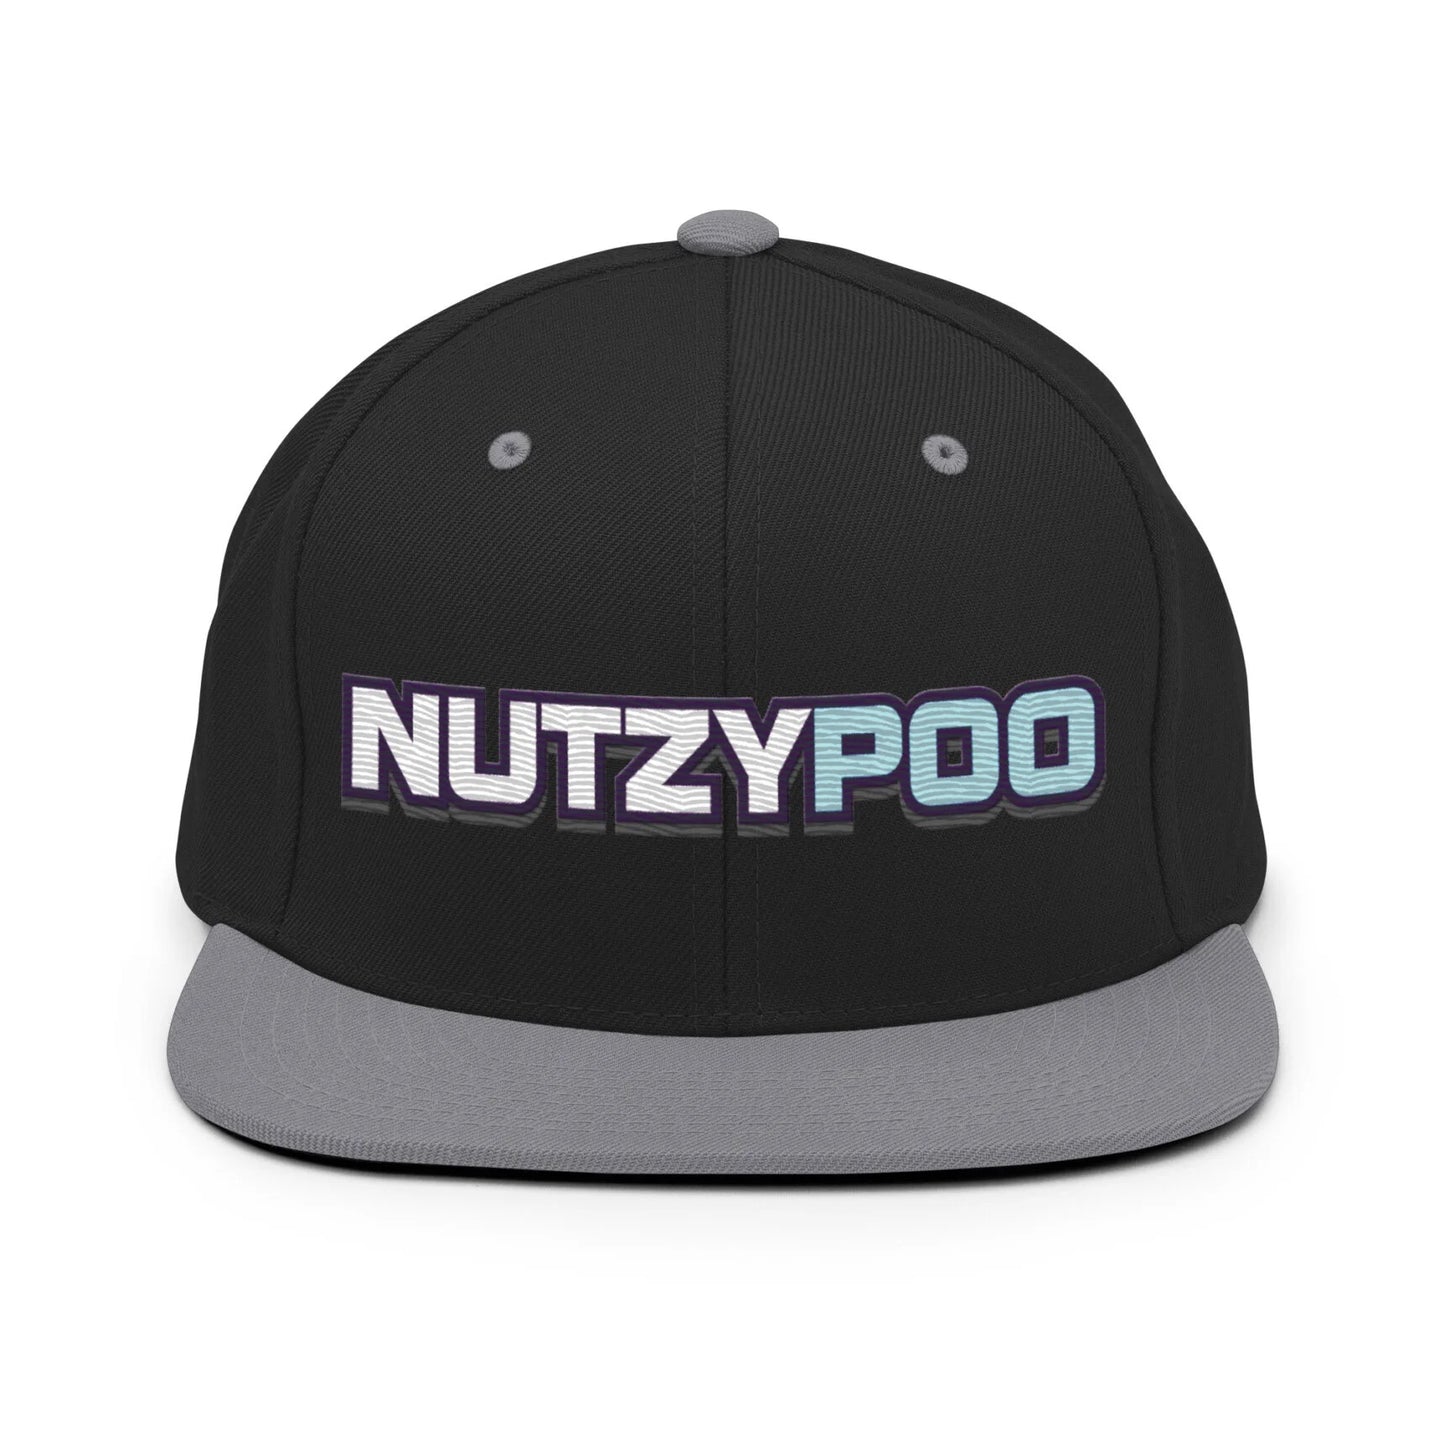 NutzyPoo ShowZone hat in black with grey brim and accents